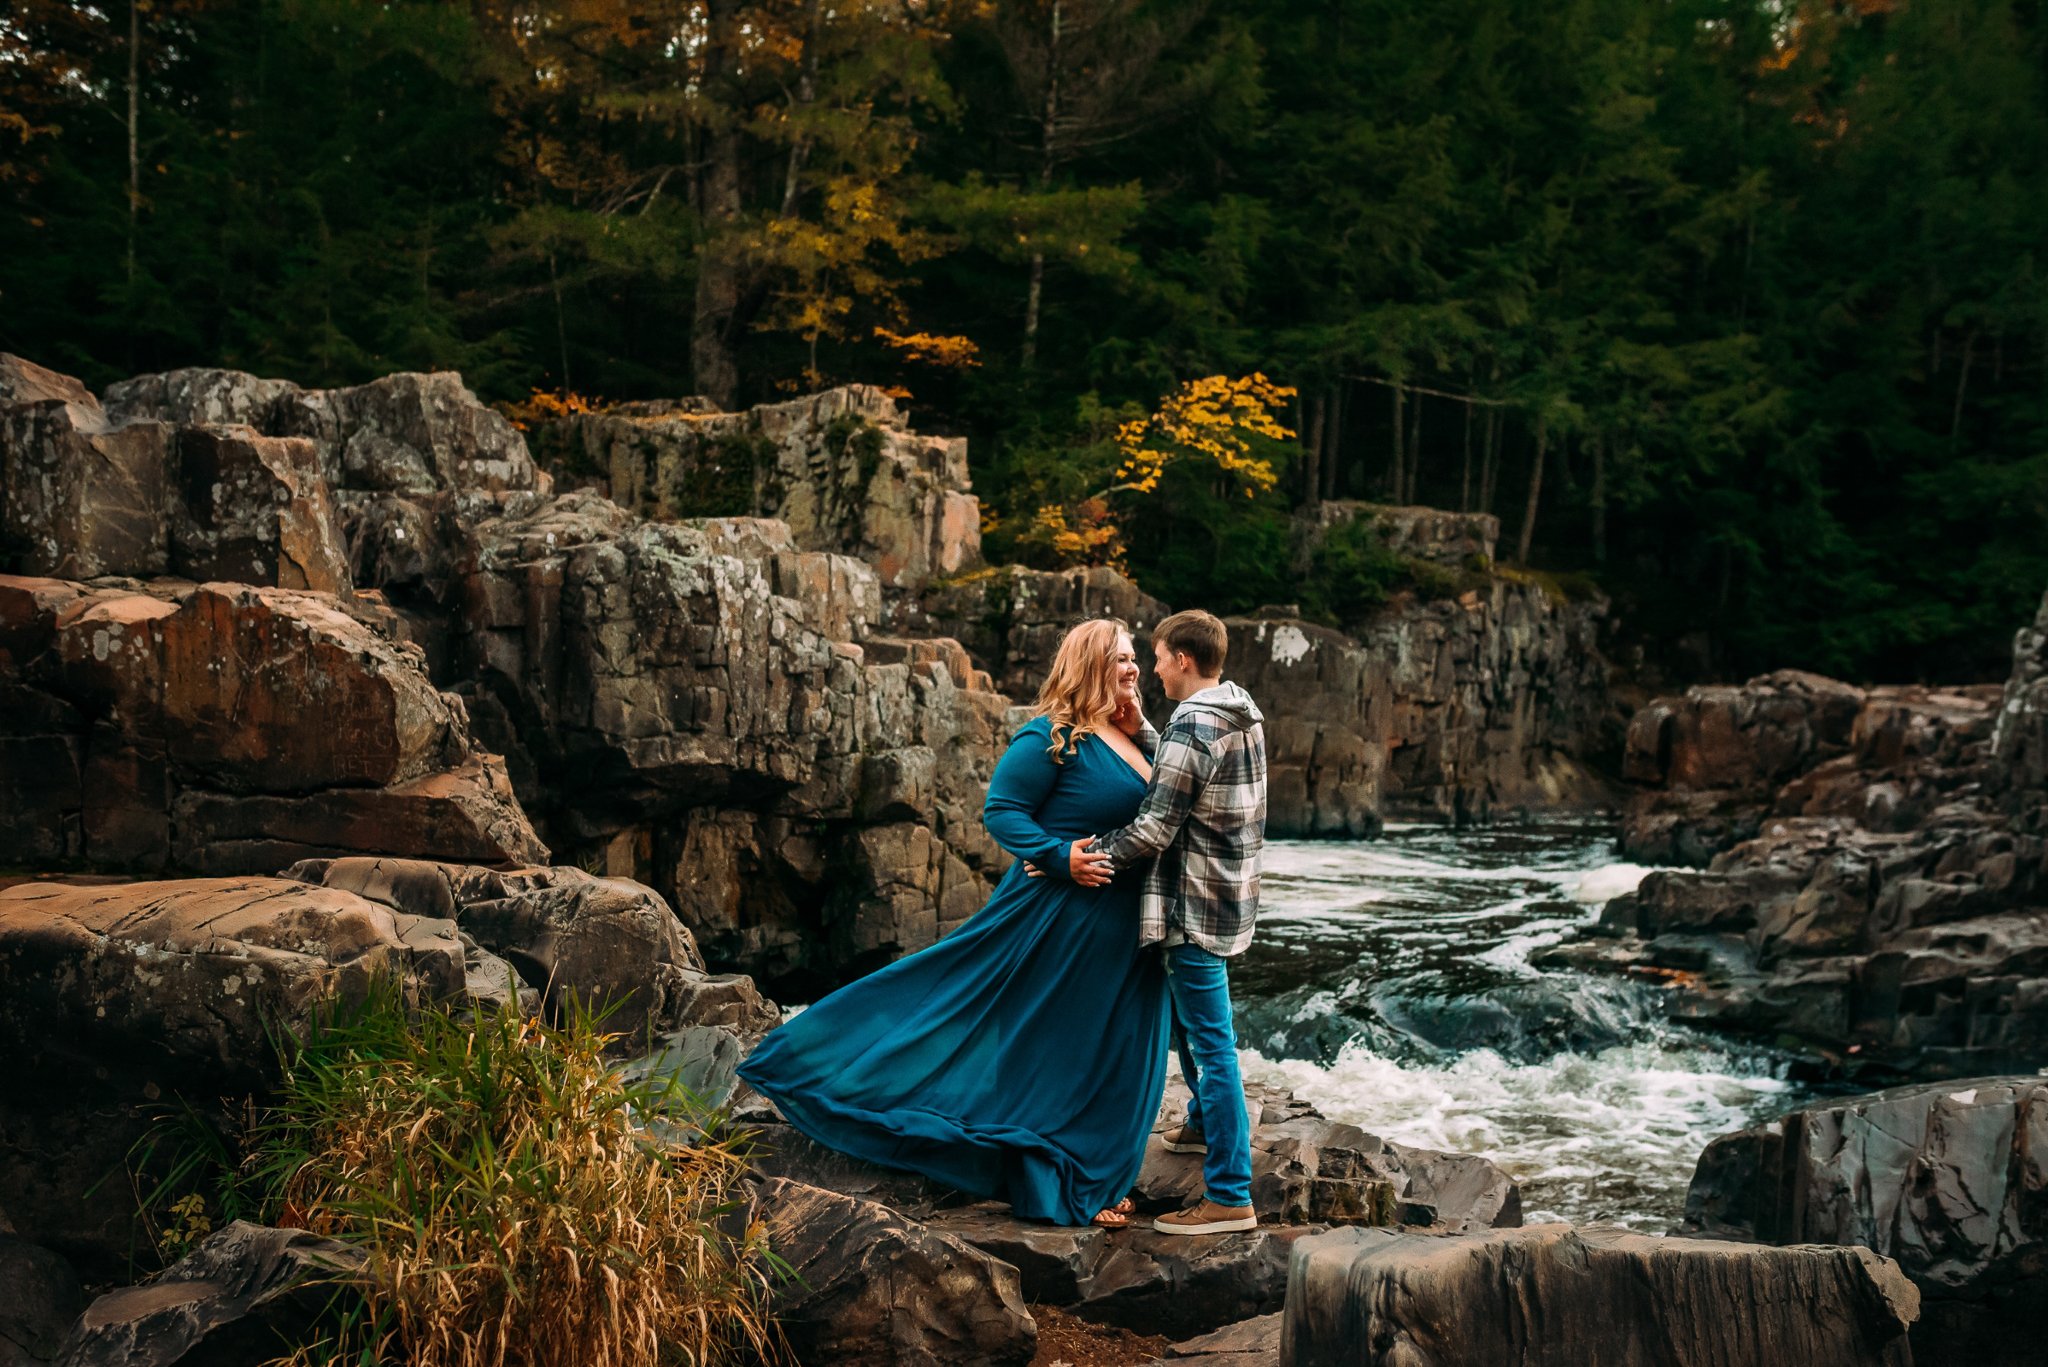 Fall photos, maternity, Wisconsin Photographer, Wausau, Green Bay, Milwaukee, Madison, Minocqua, Door County, Photoshoot Outfit Ideas, What to Wear Family Photo engagement photos